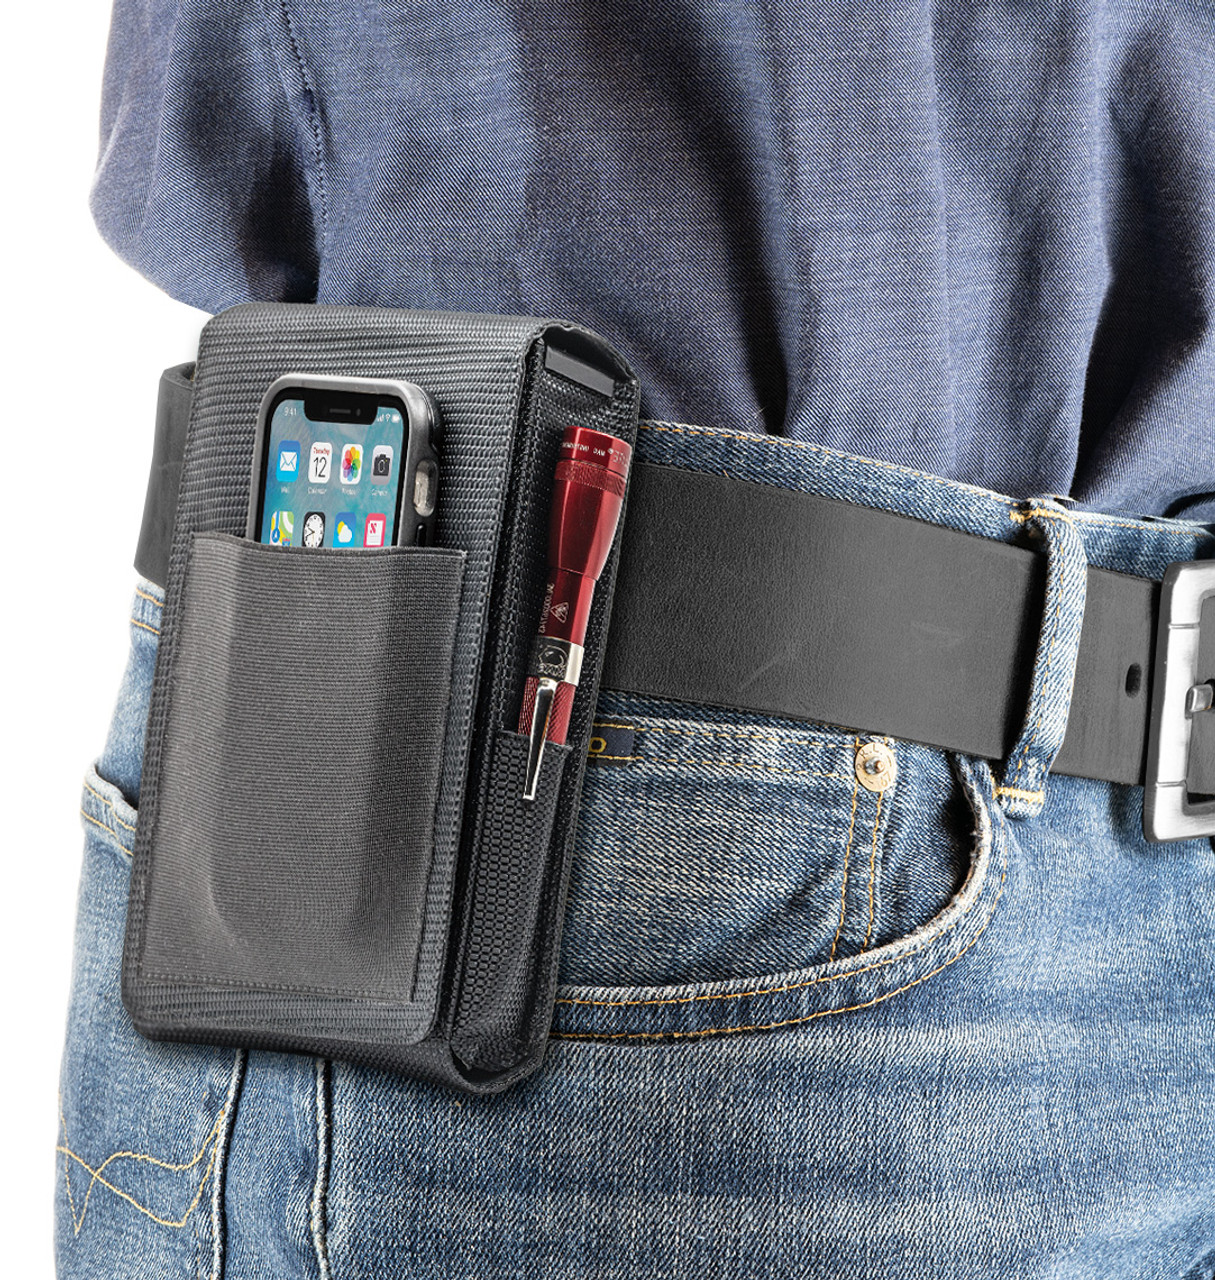 The Kahr K9 Perfect Holster